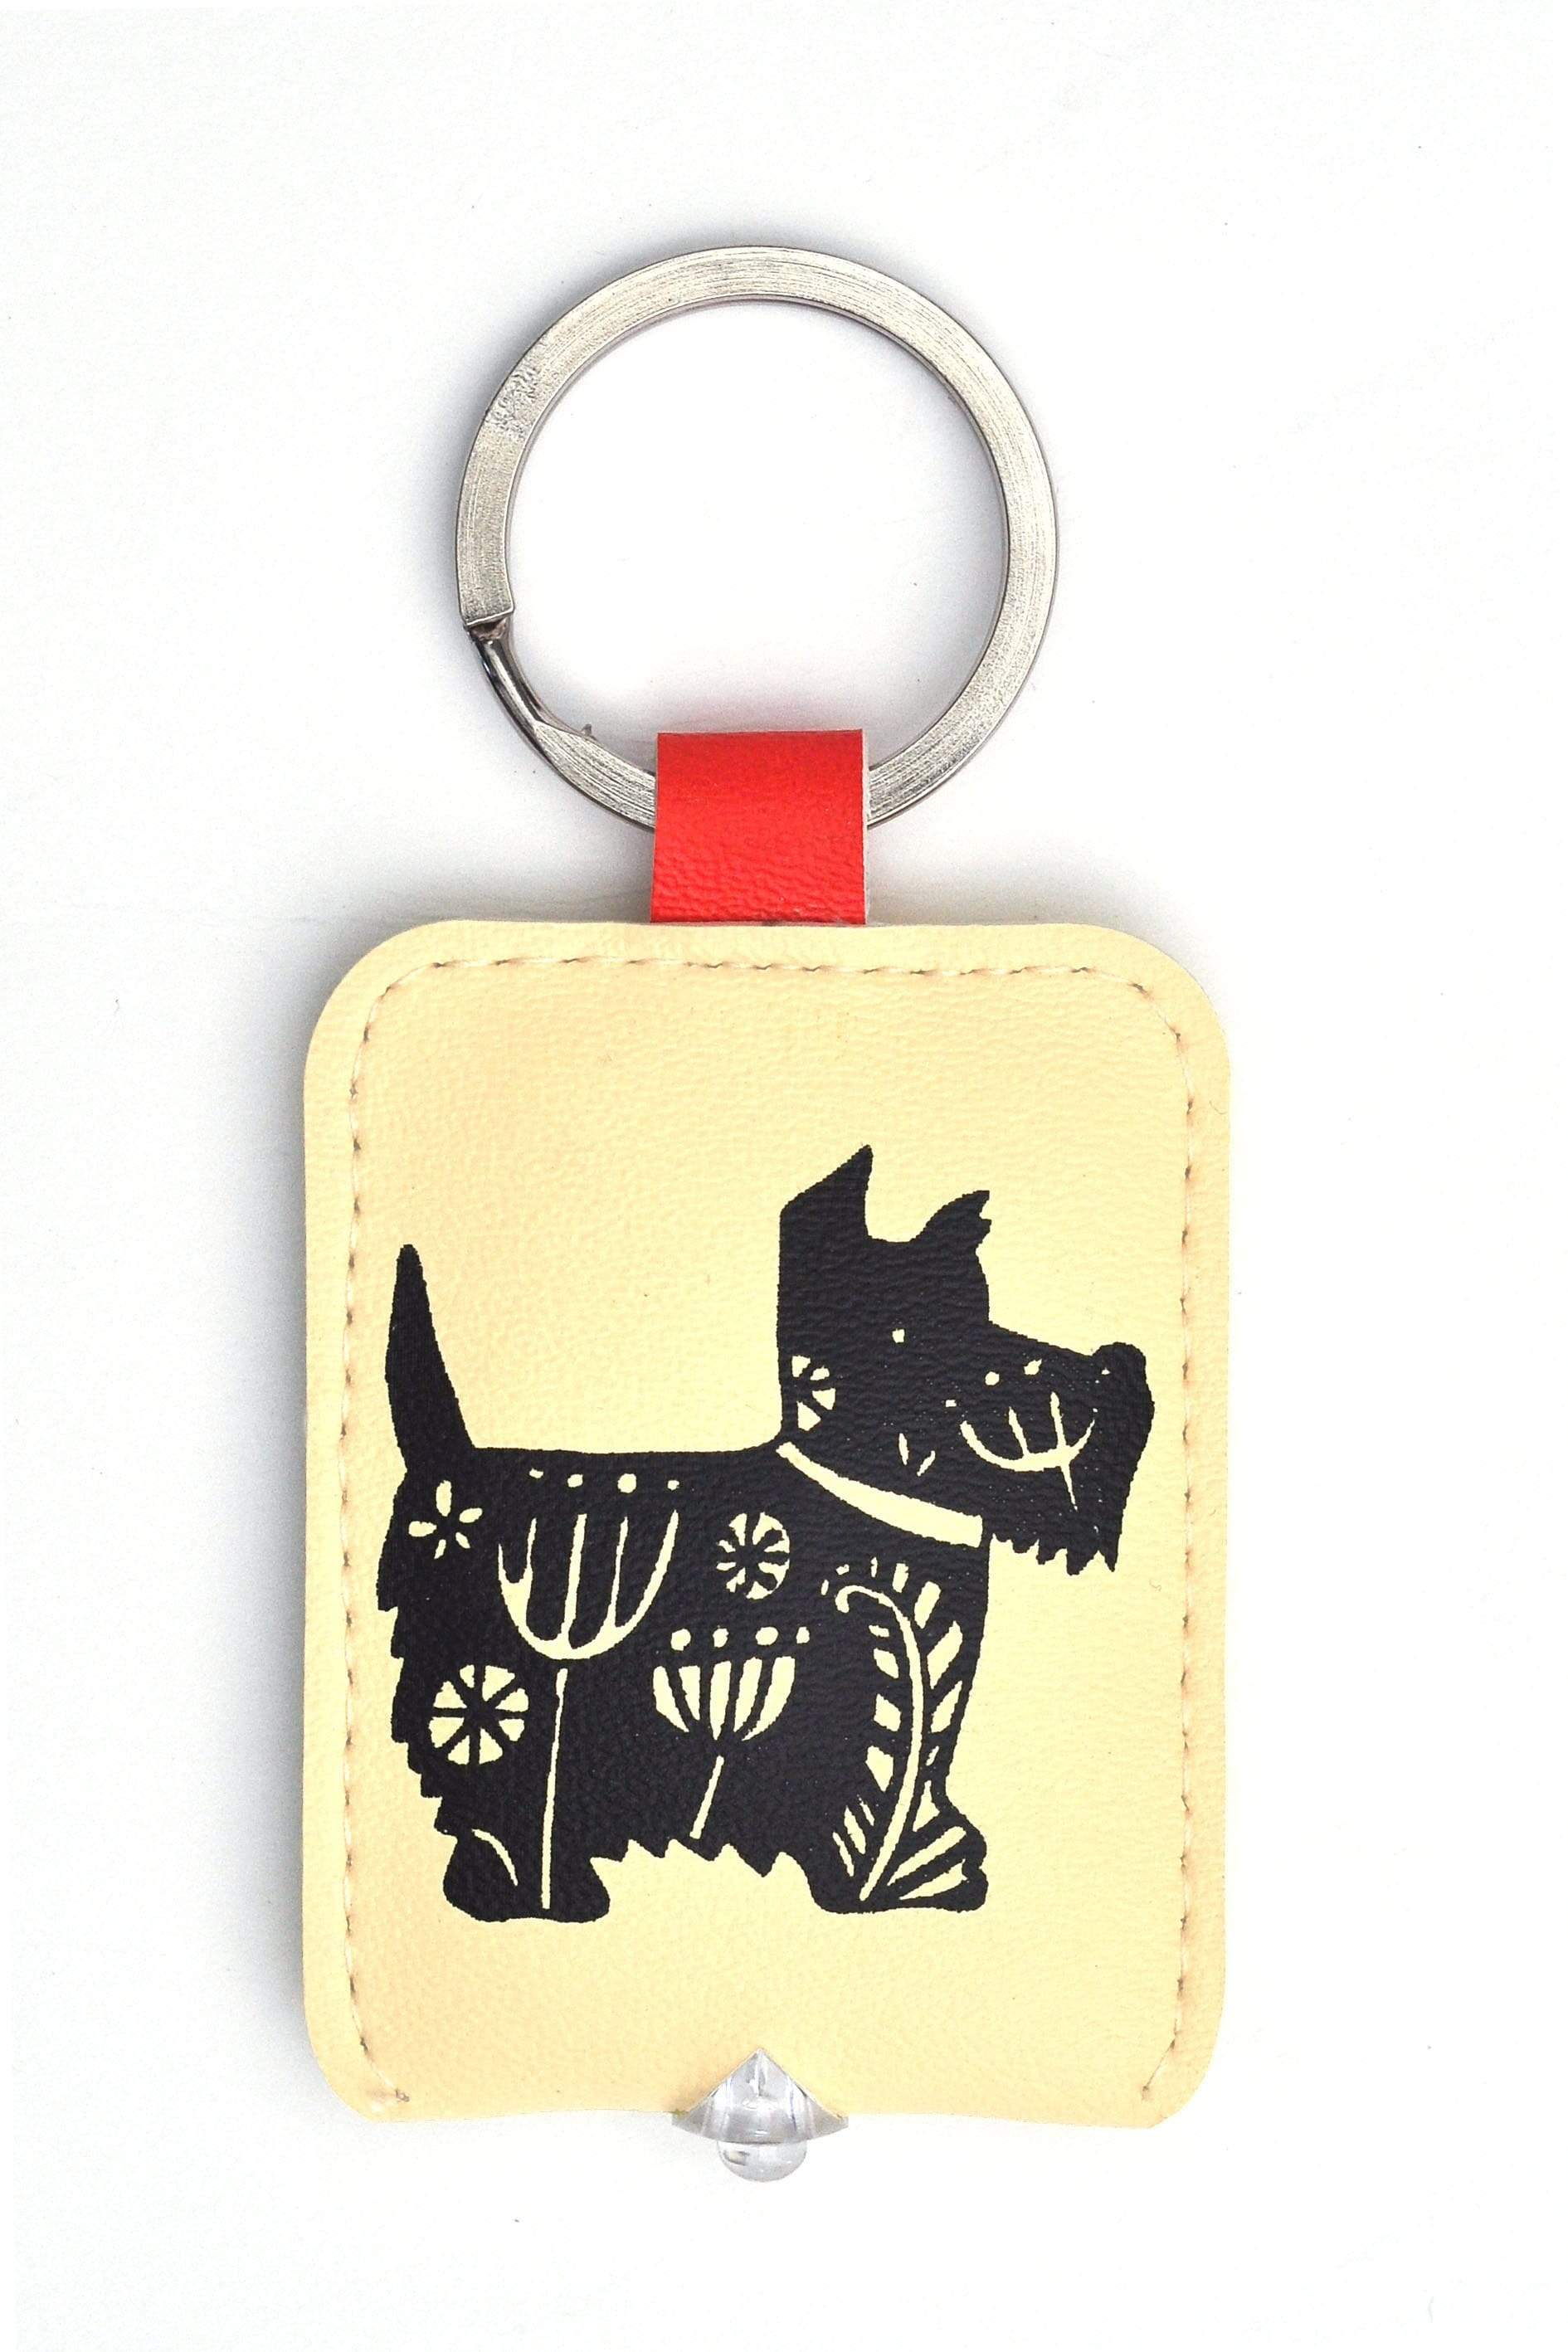 Curios Gifts Keyring Slogans Keylight - Keyring with Built-in LED Torch - Woodcut Dog